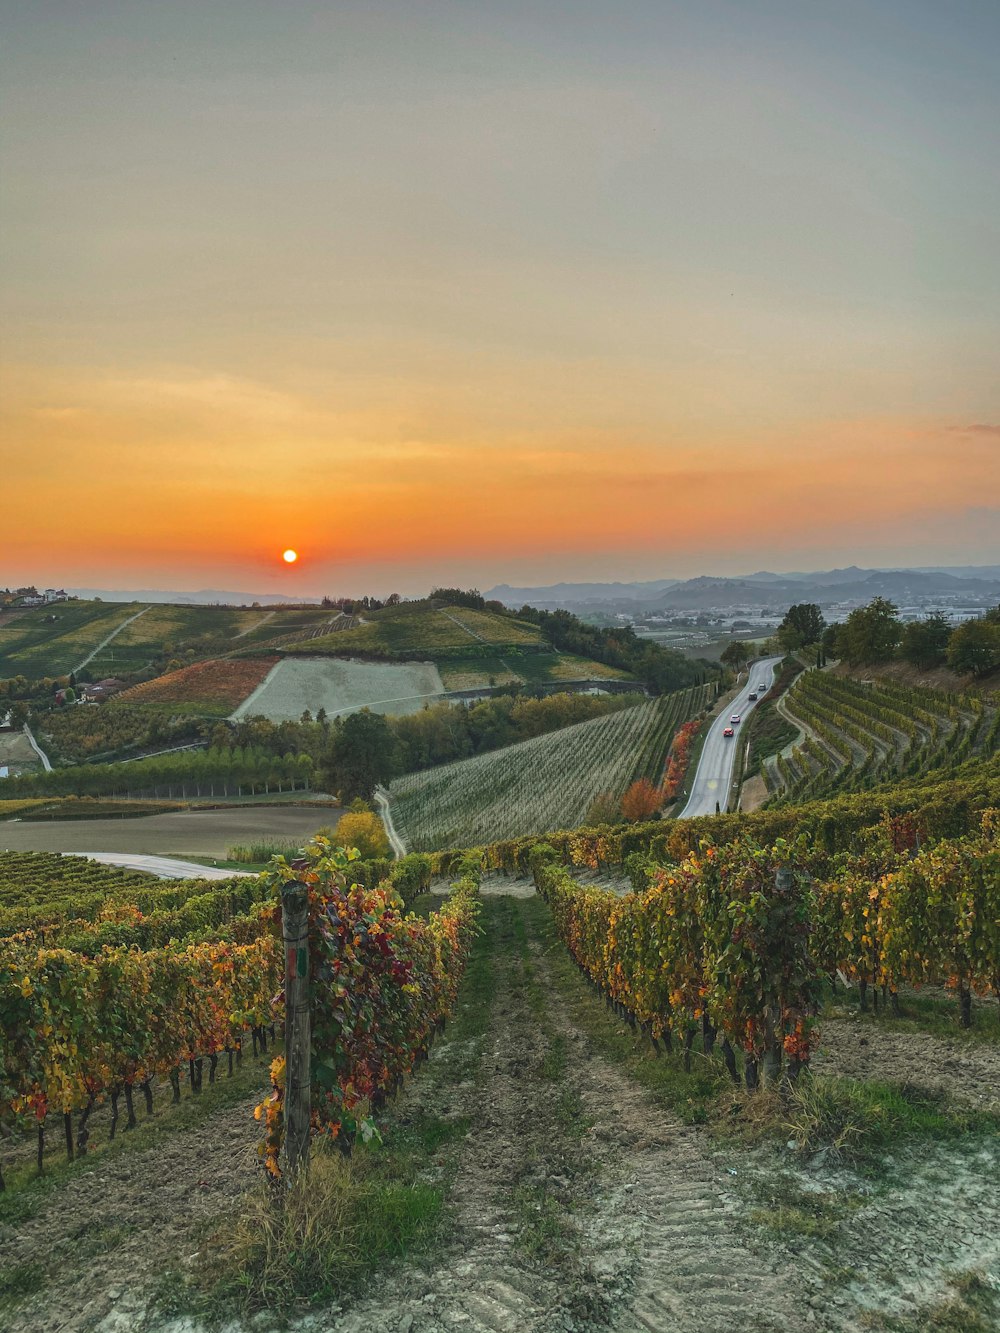 a vineyard with a sunset